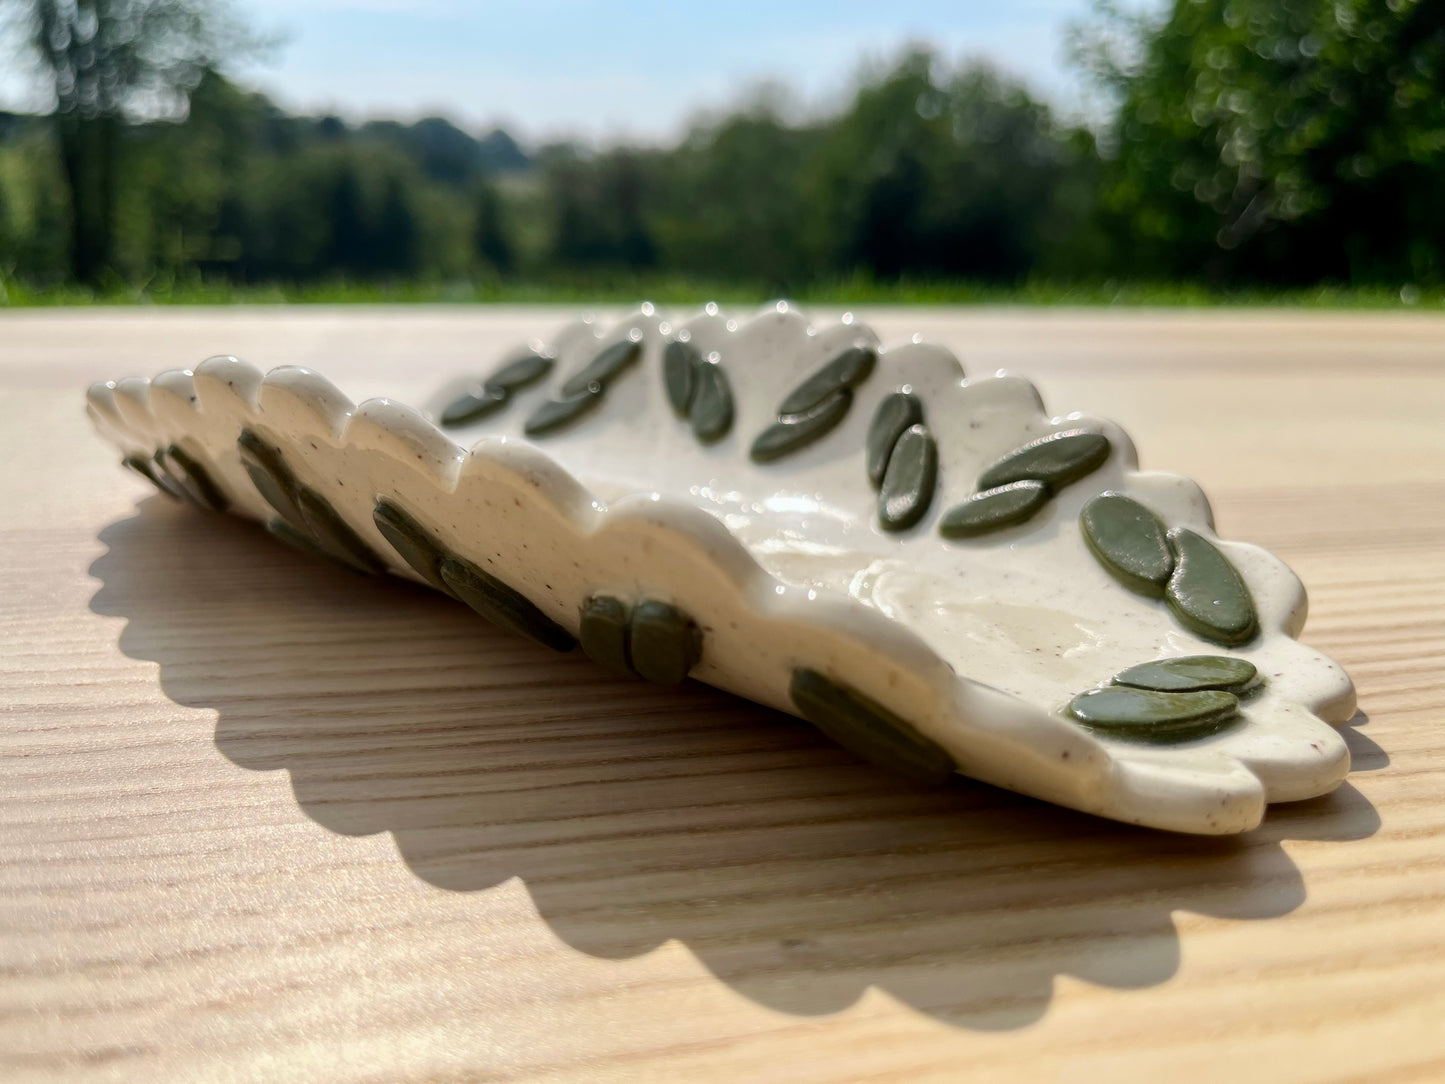 Olive Pebbles Serving Tray